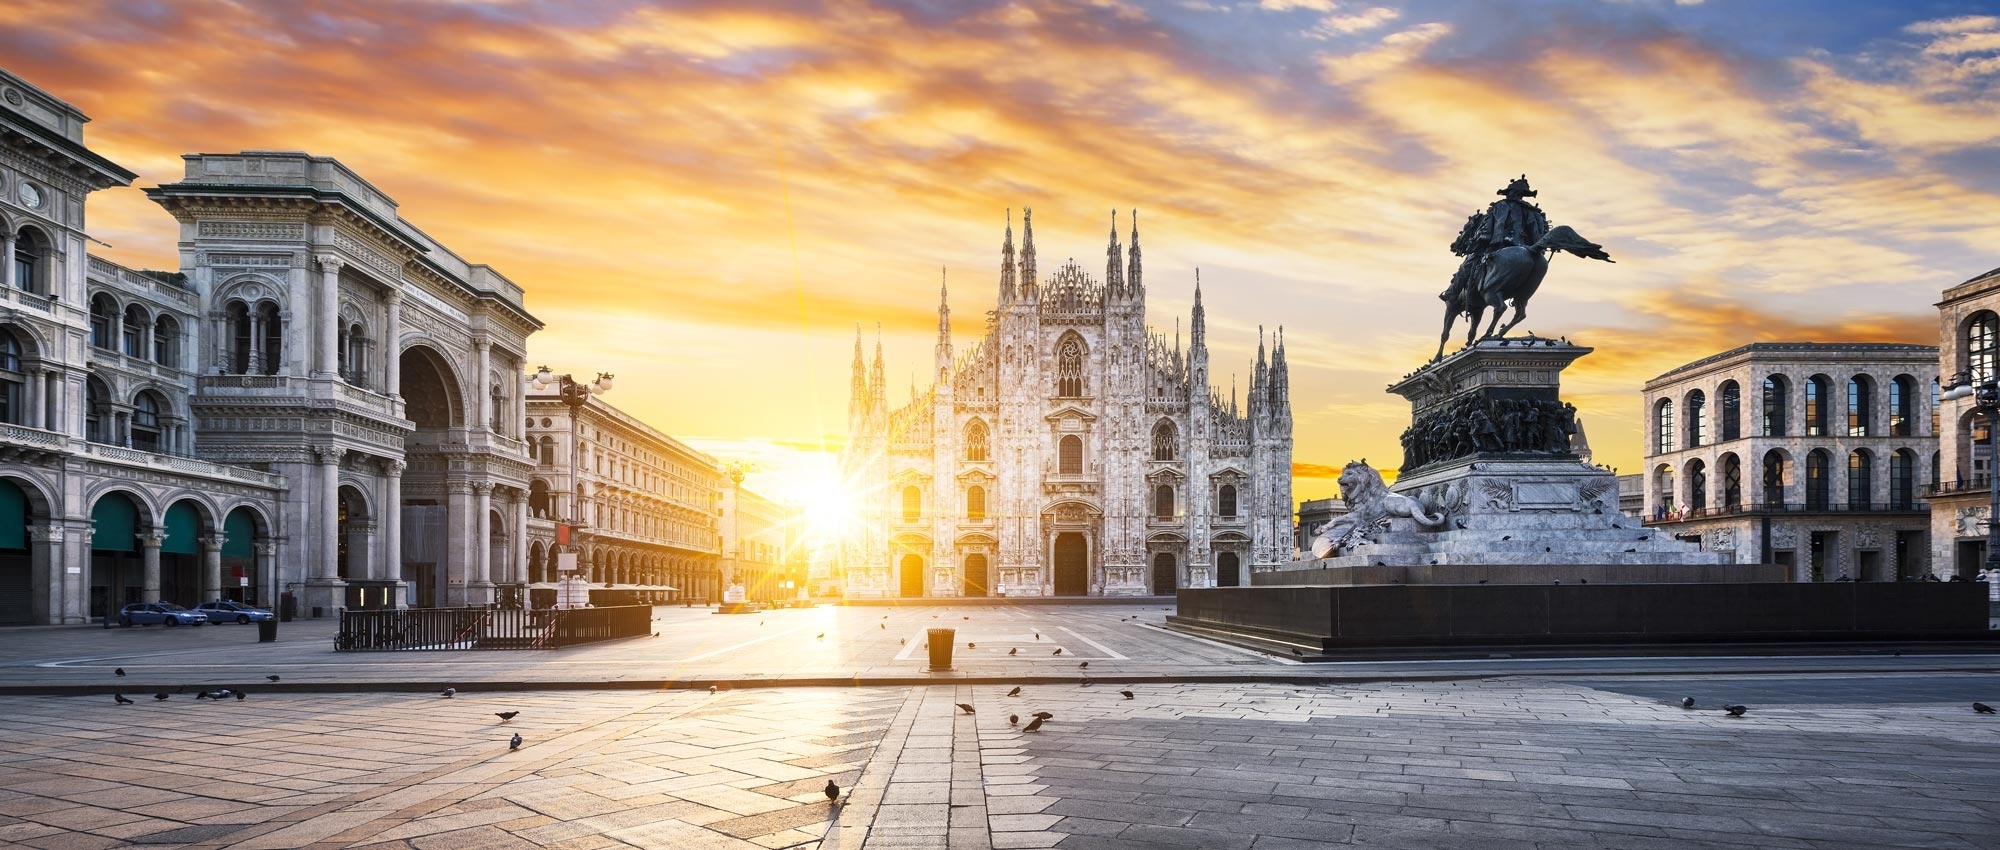 how to rent a car in milan and see this city